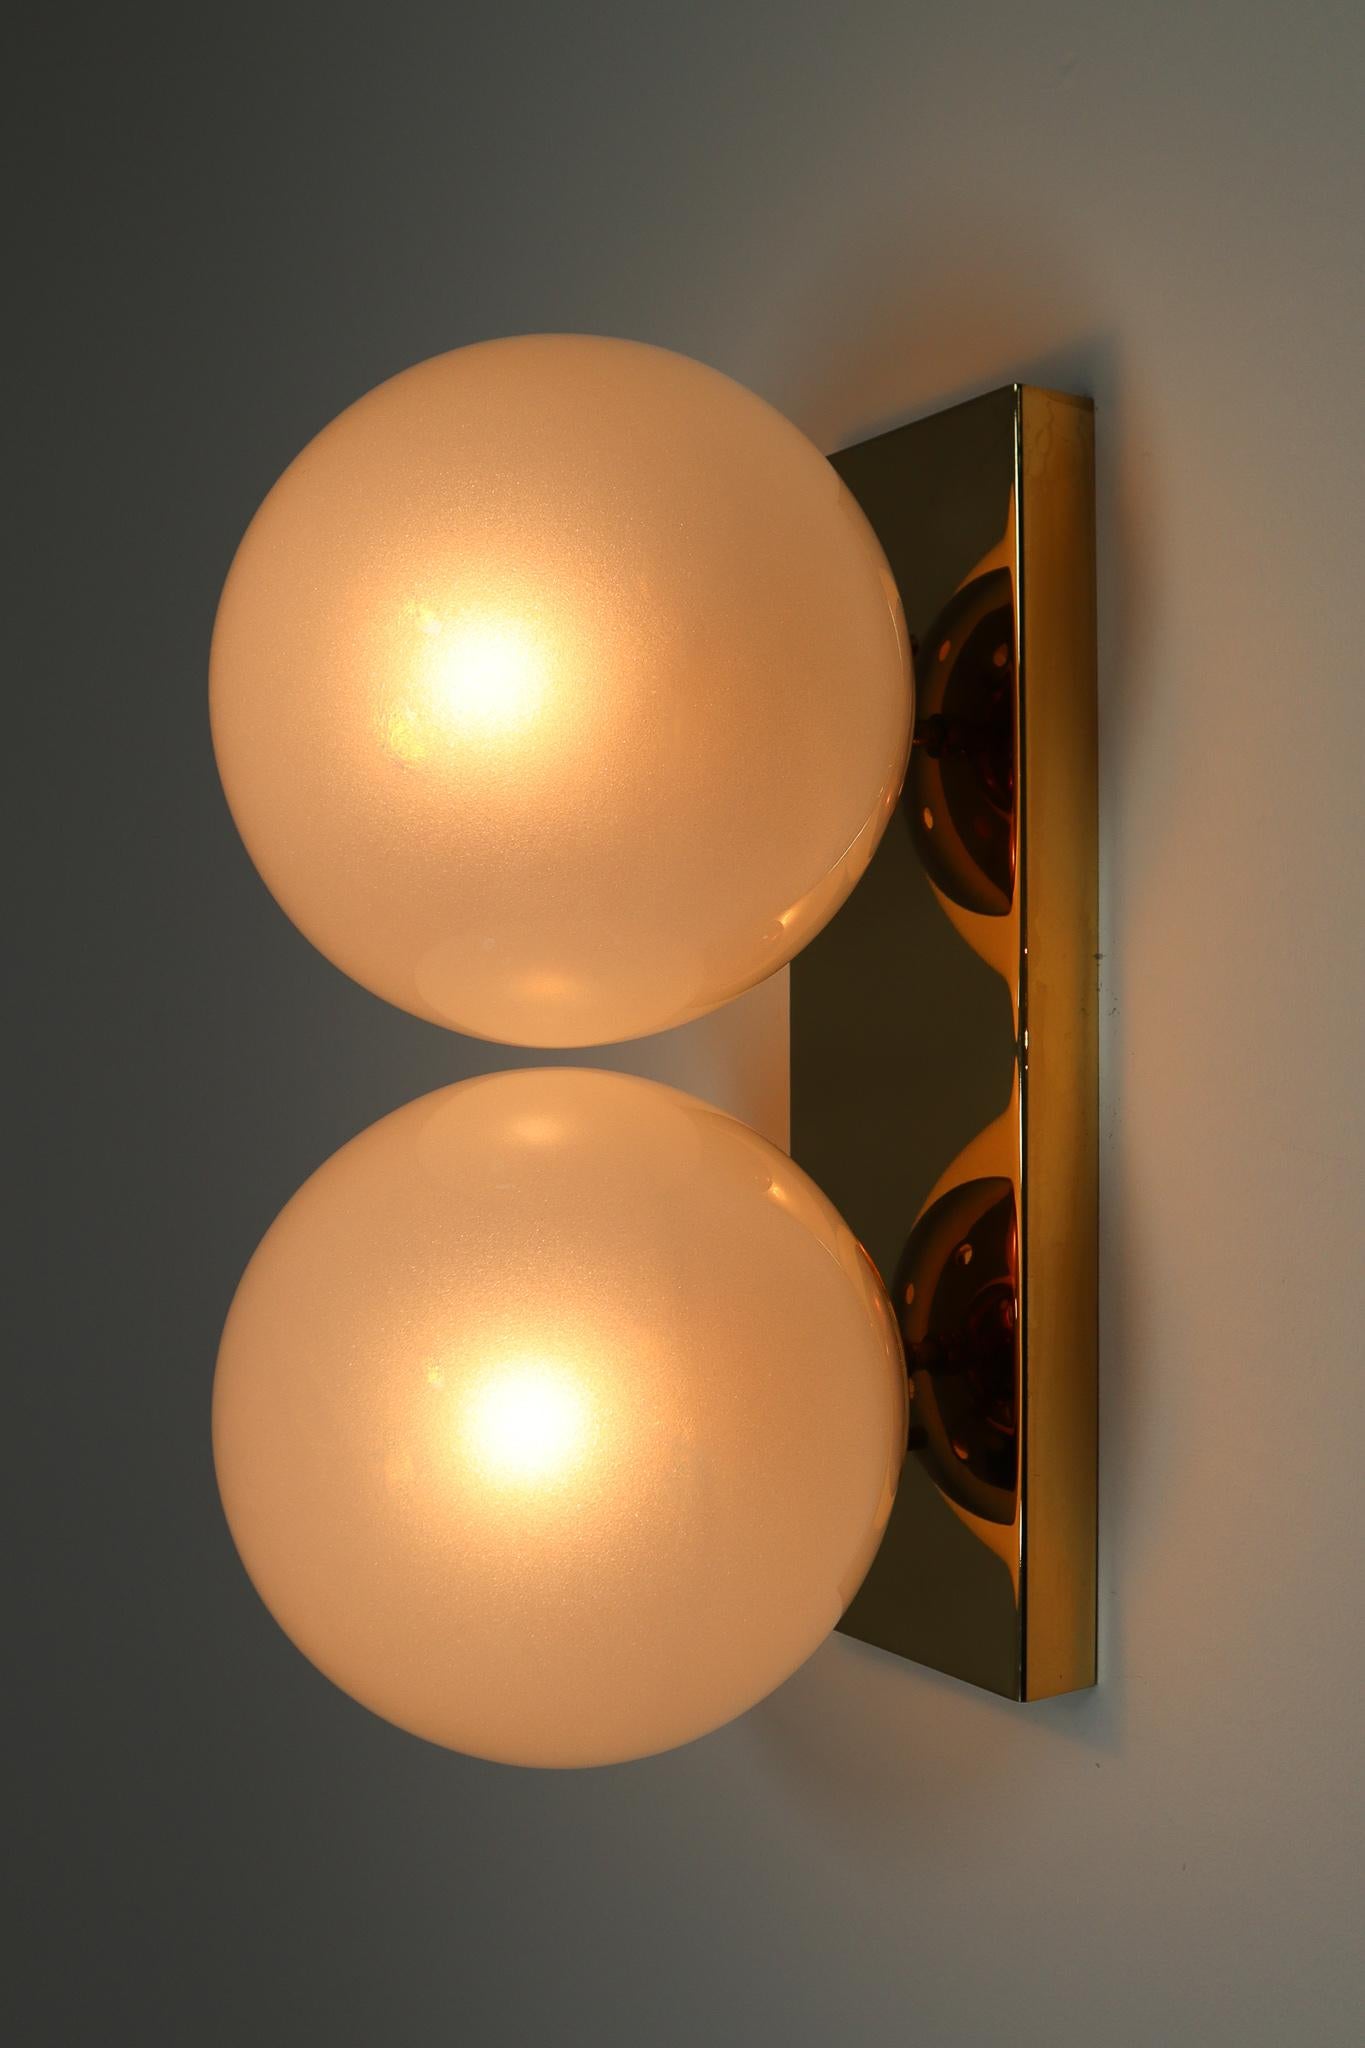 Mid-20th Century Brass Wall/Ceiling Lights White Frosted Glass Globes, 1960s

Double wall sconces / ceiling lights with rectangular brass backplates and hand blew frosted glass globes. The bulbs are connected directly to a brass vertical/horizontal